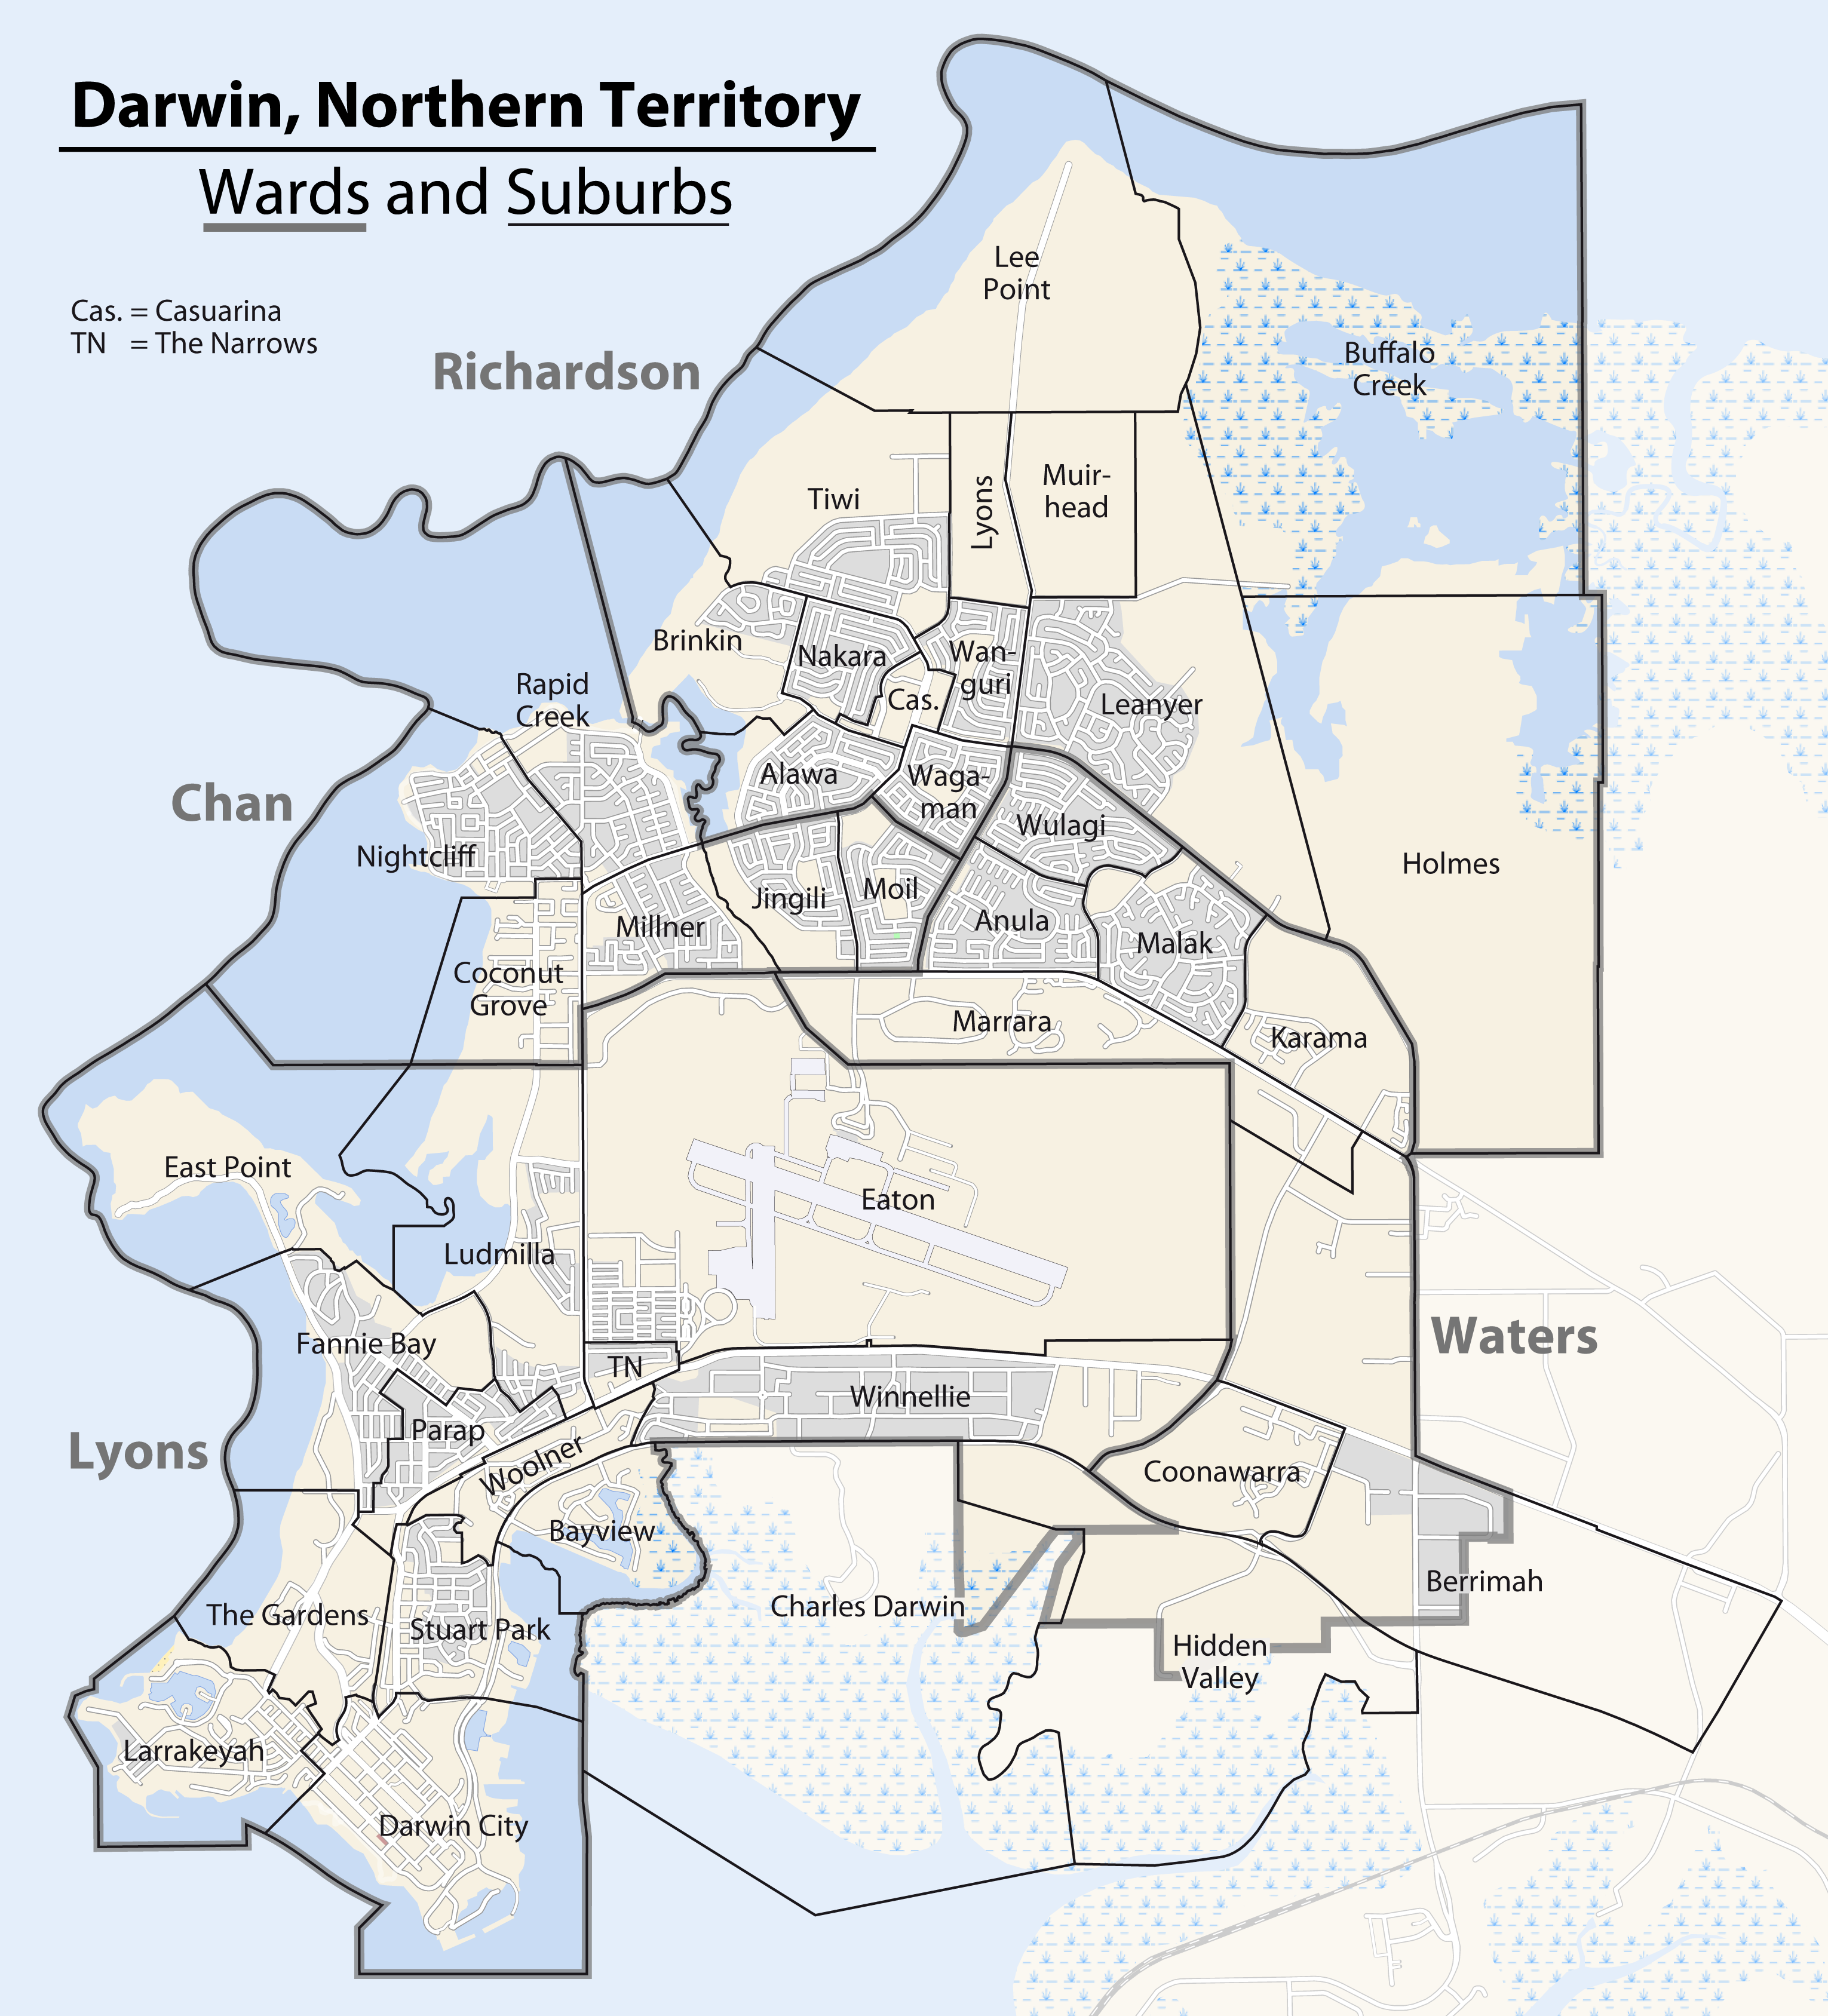 Map Of The Wards And Suburbs Of Darwin%2C Northern Territory 